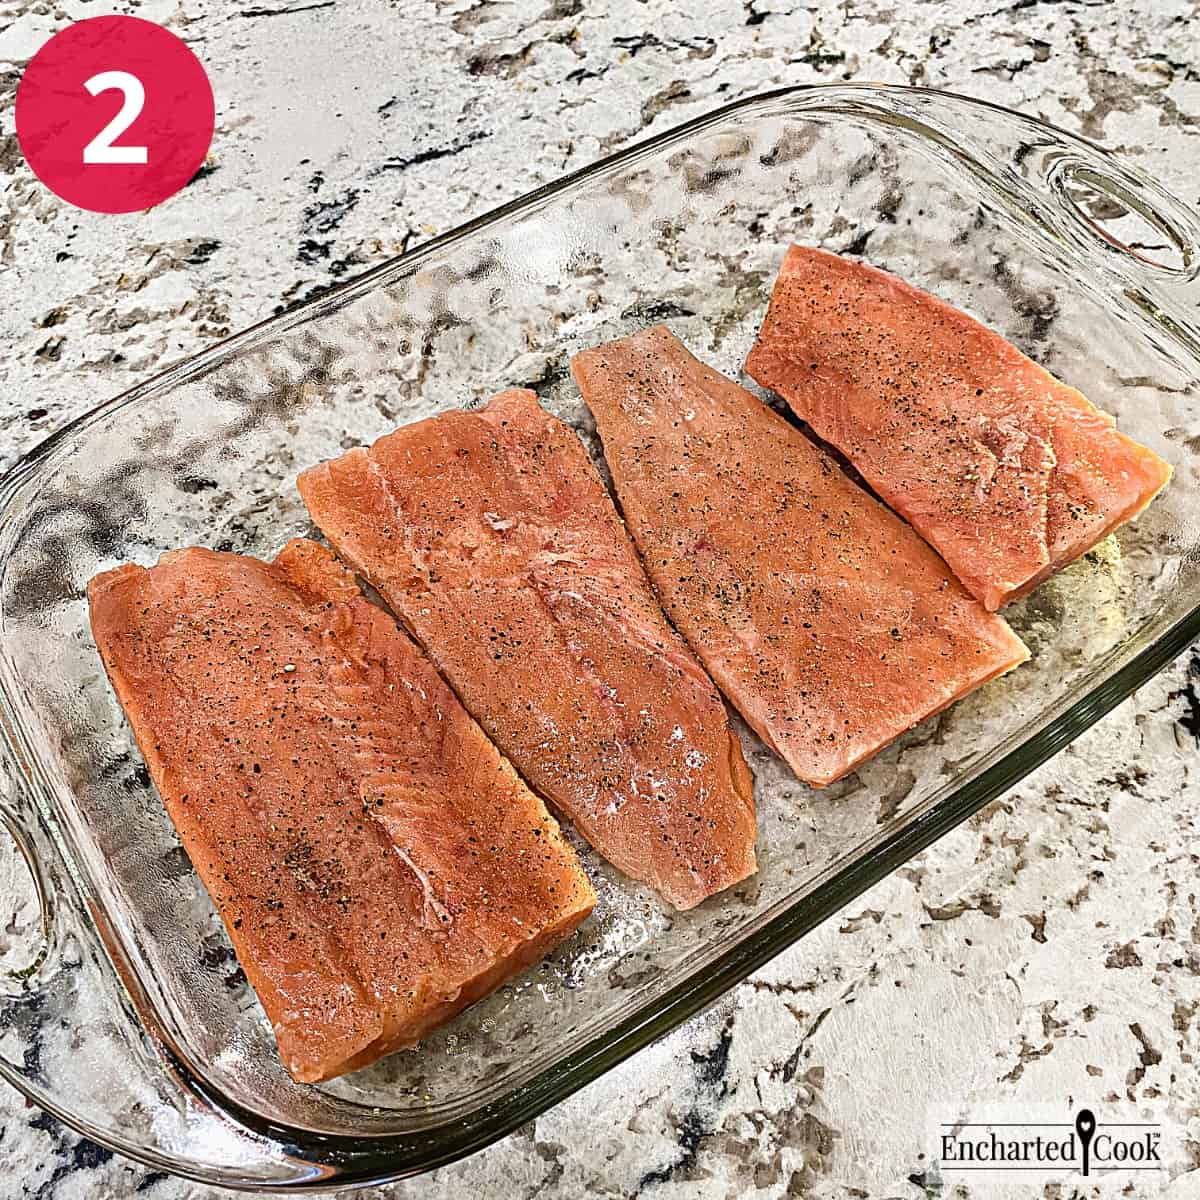 Process Photo 2 - The salmon is seasoned with salt and pepper in a baking dish.